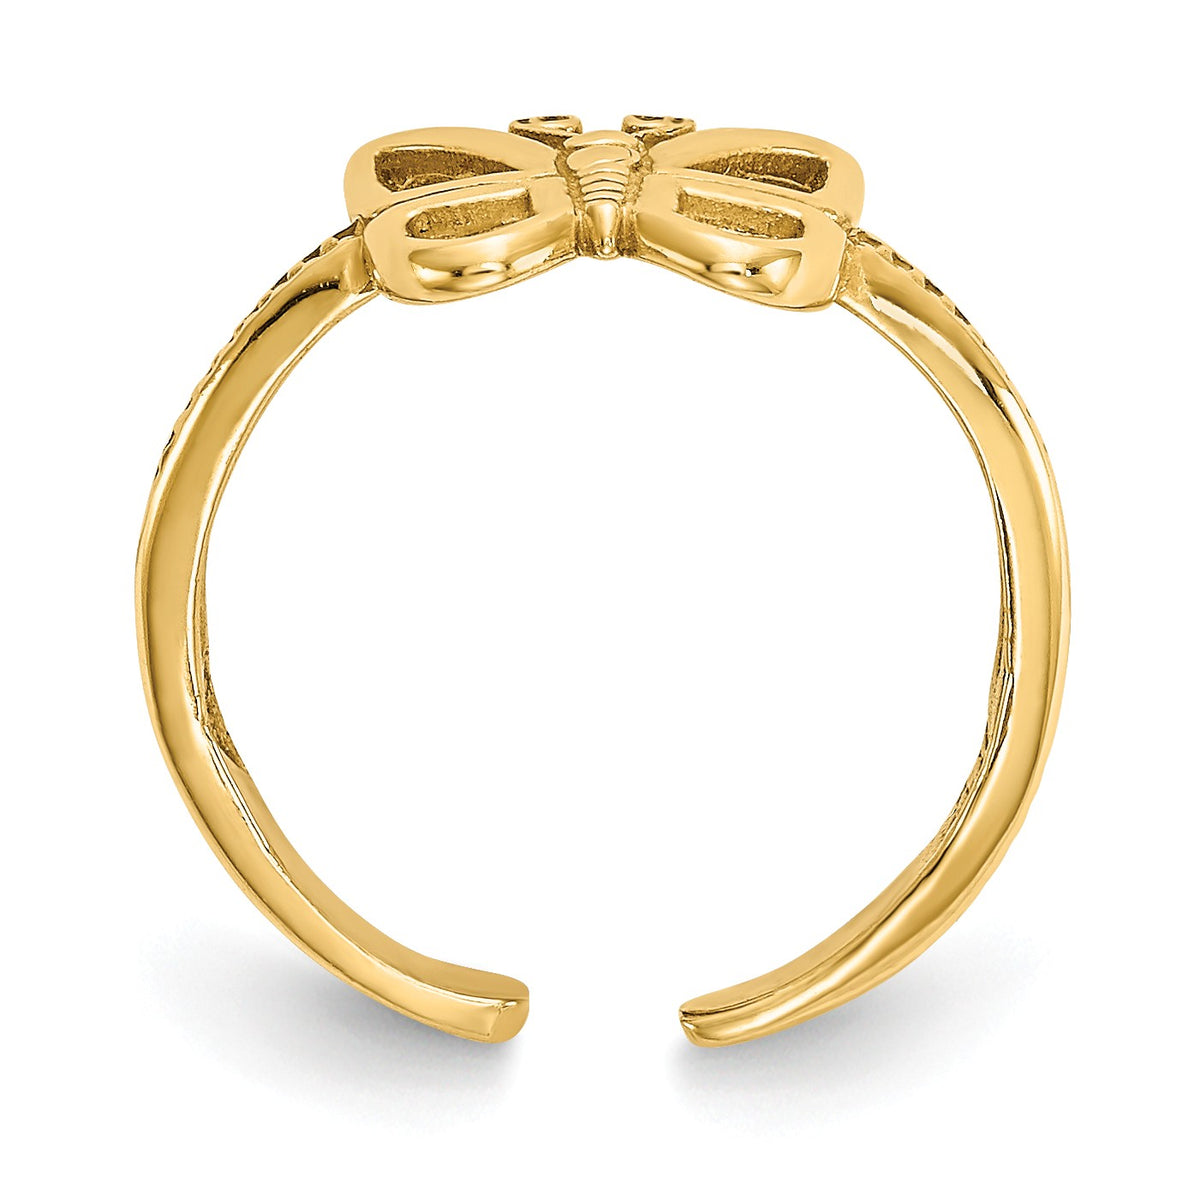 Alternate view of the Butterfly Toe 1mm Ring in 14 Karat Gold by The Black Bow Jewelry Co.